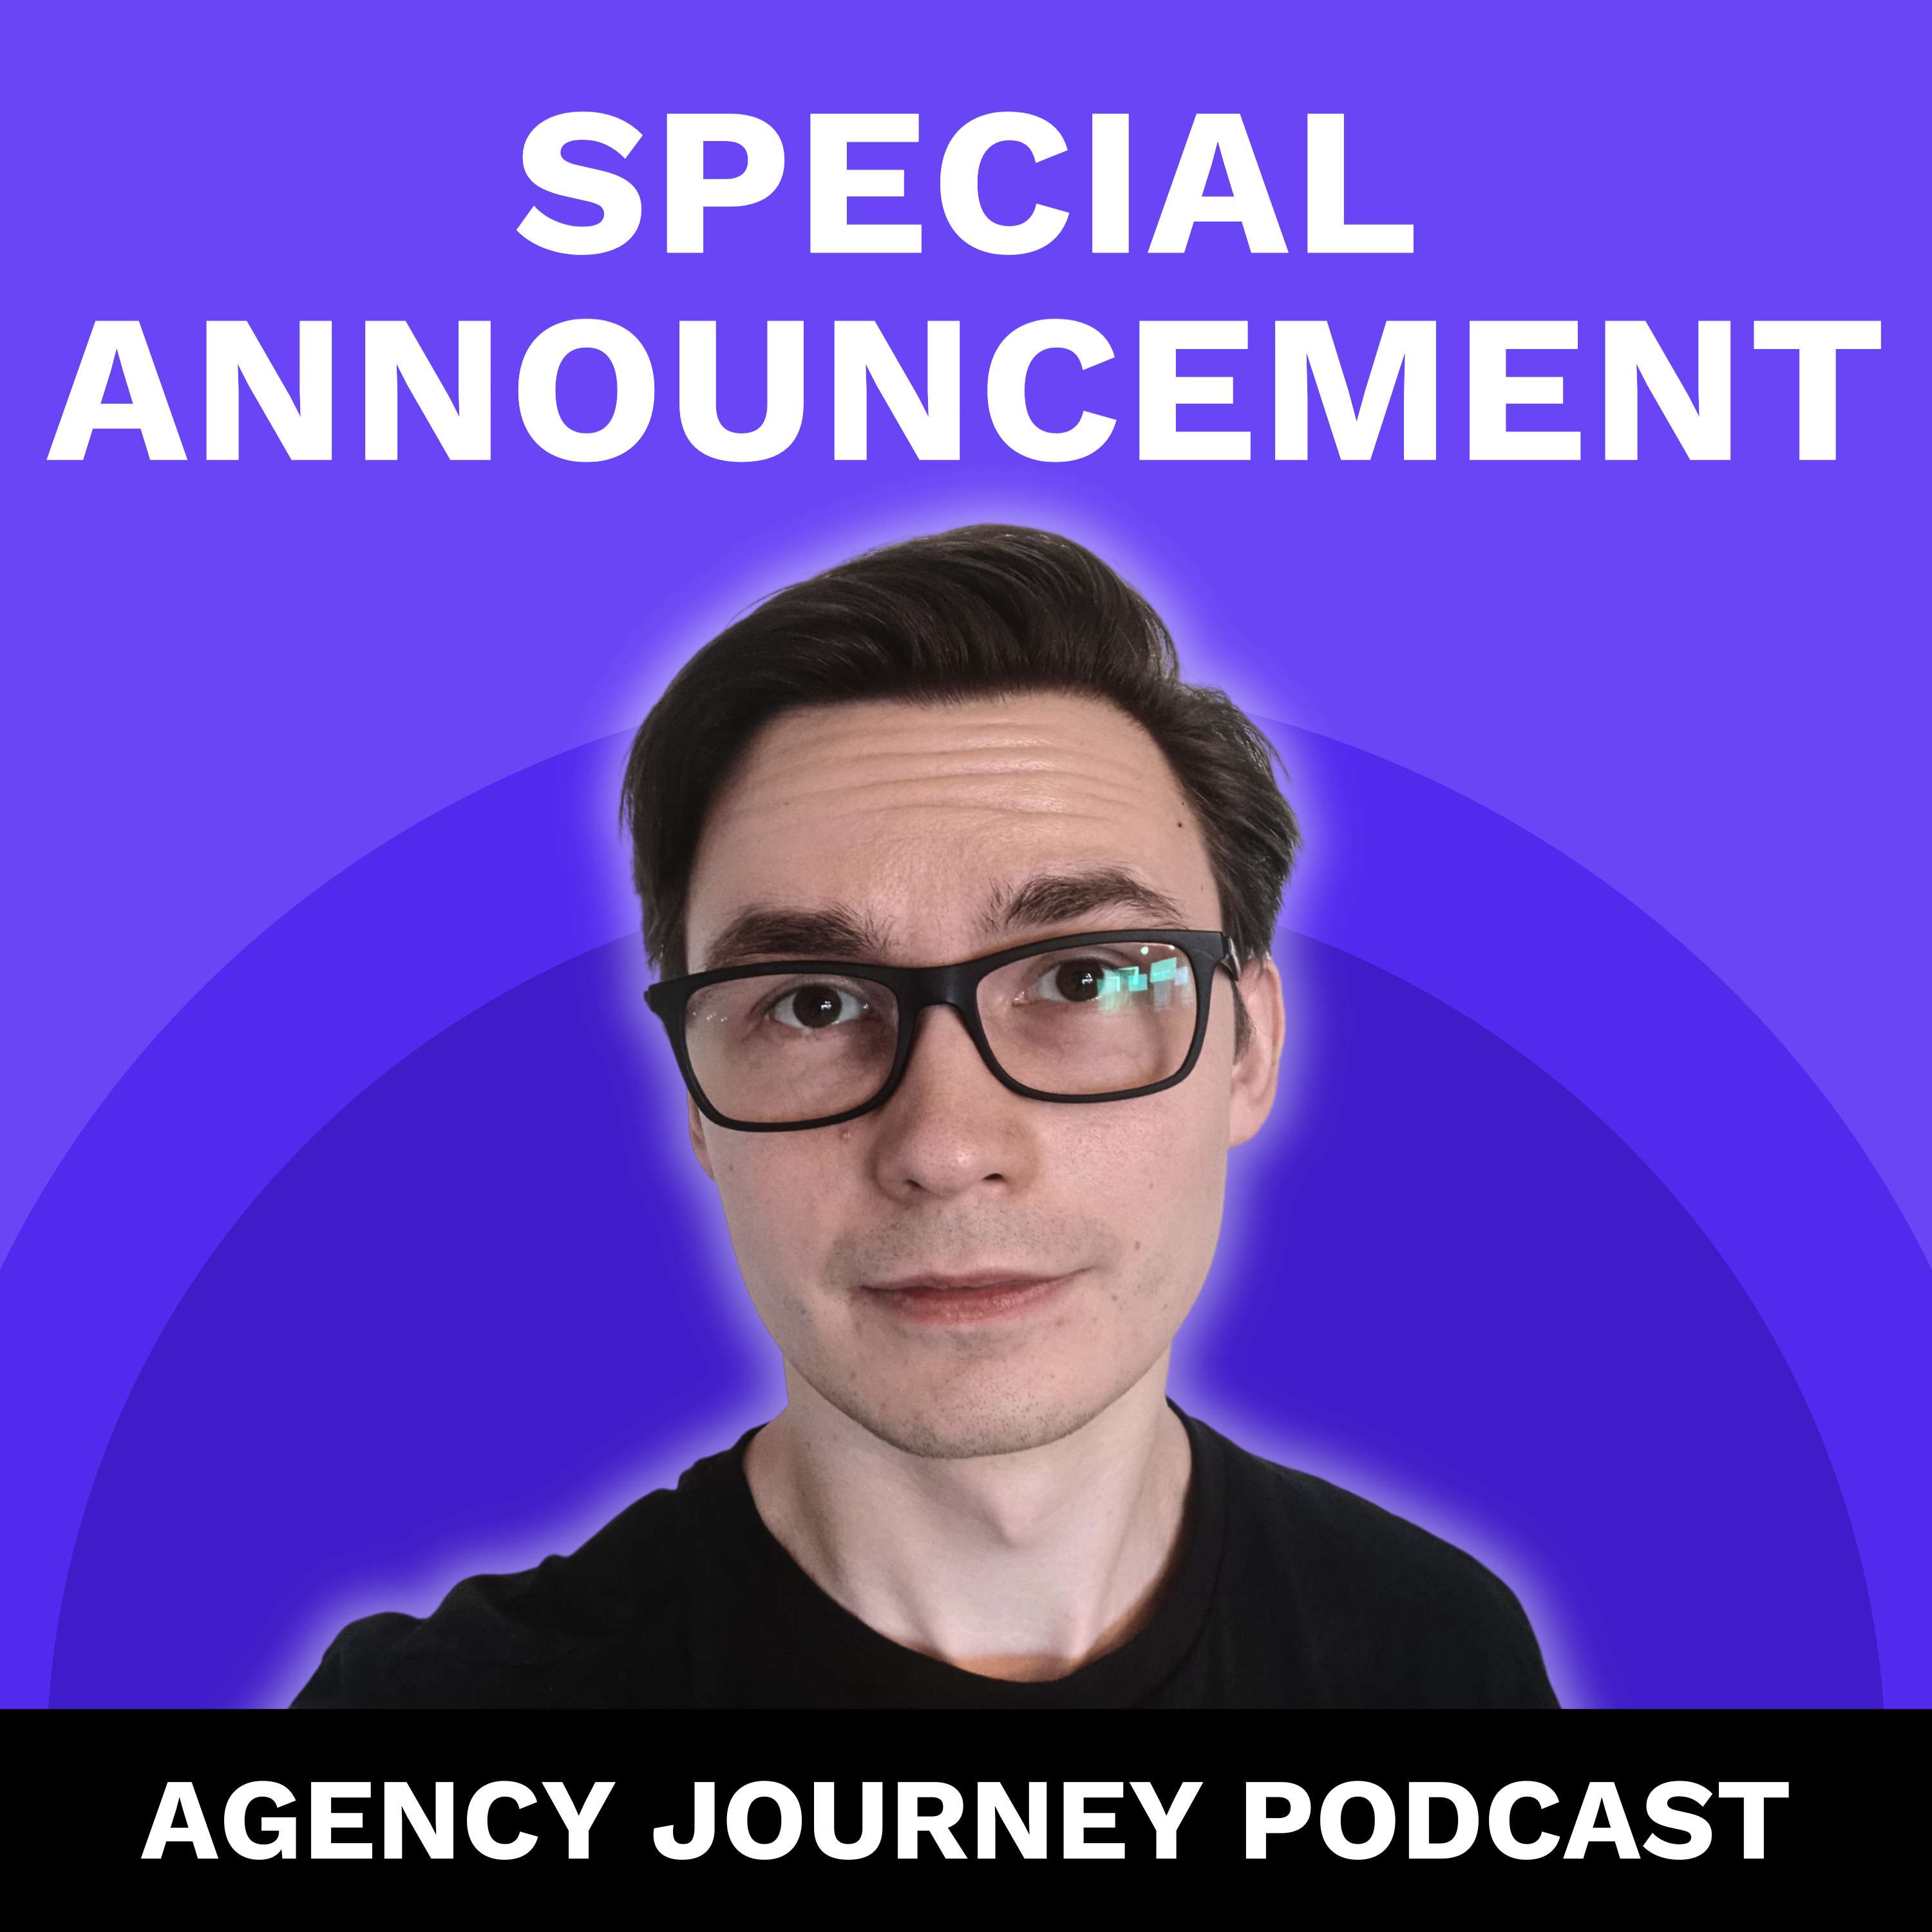 A Special Announcement About the Future of Agency Journey